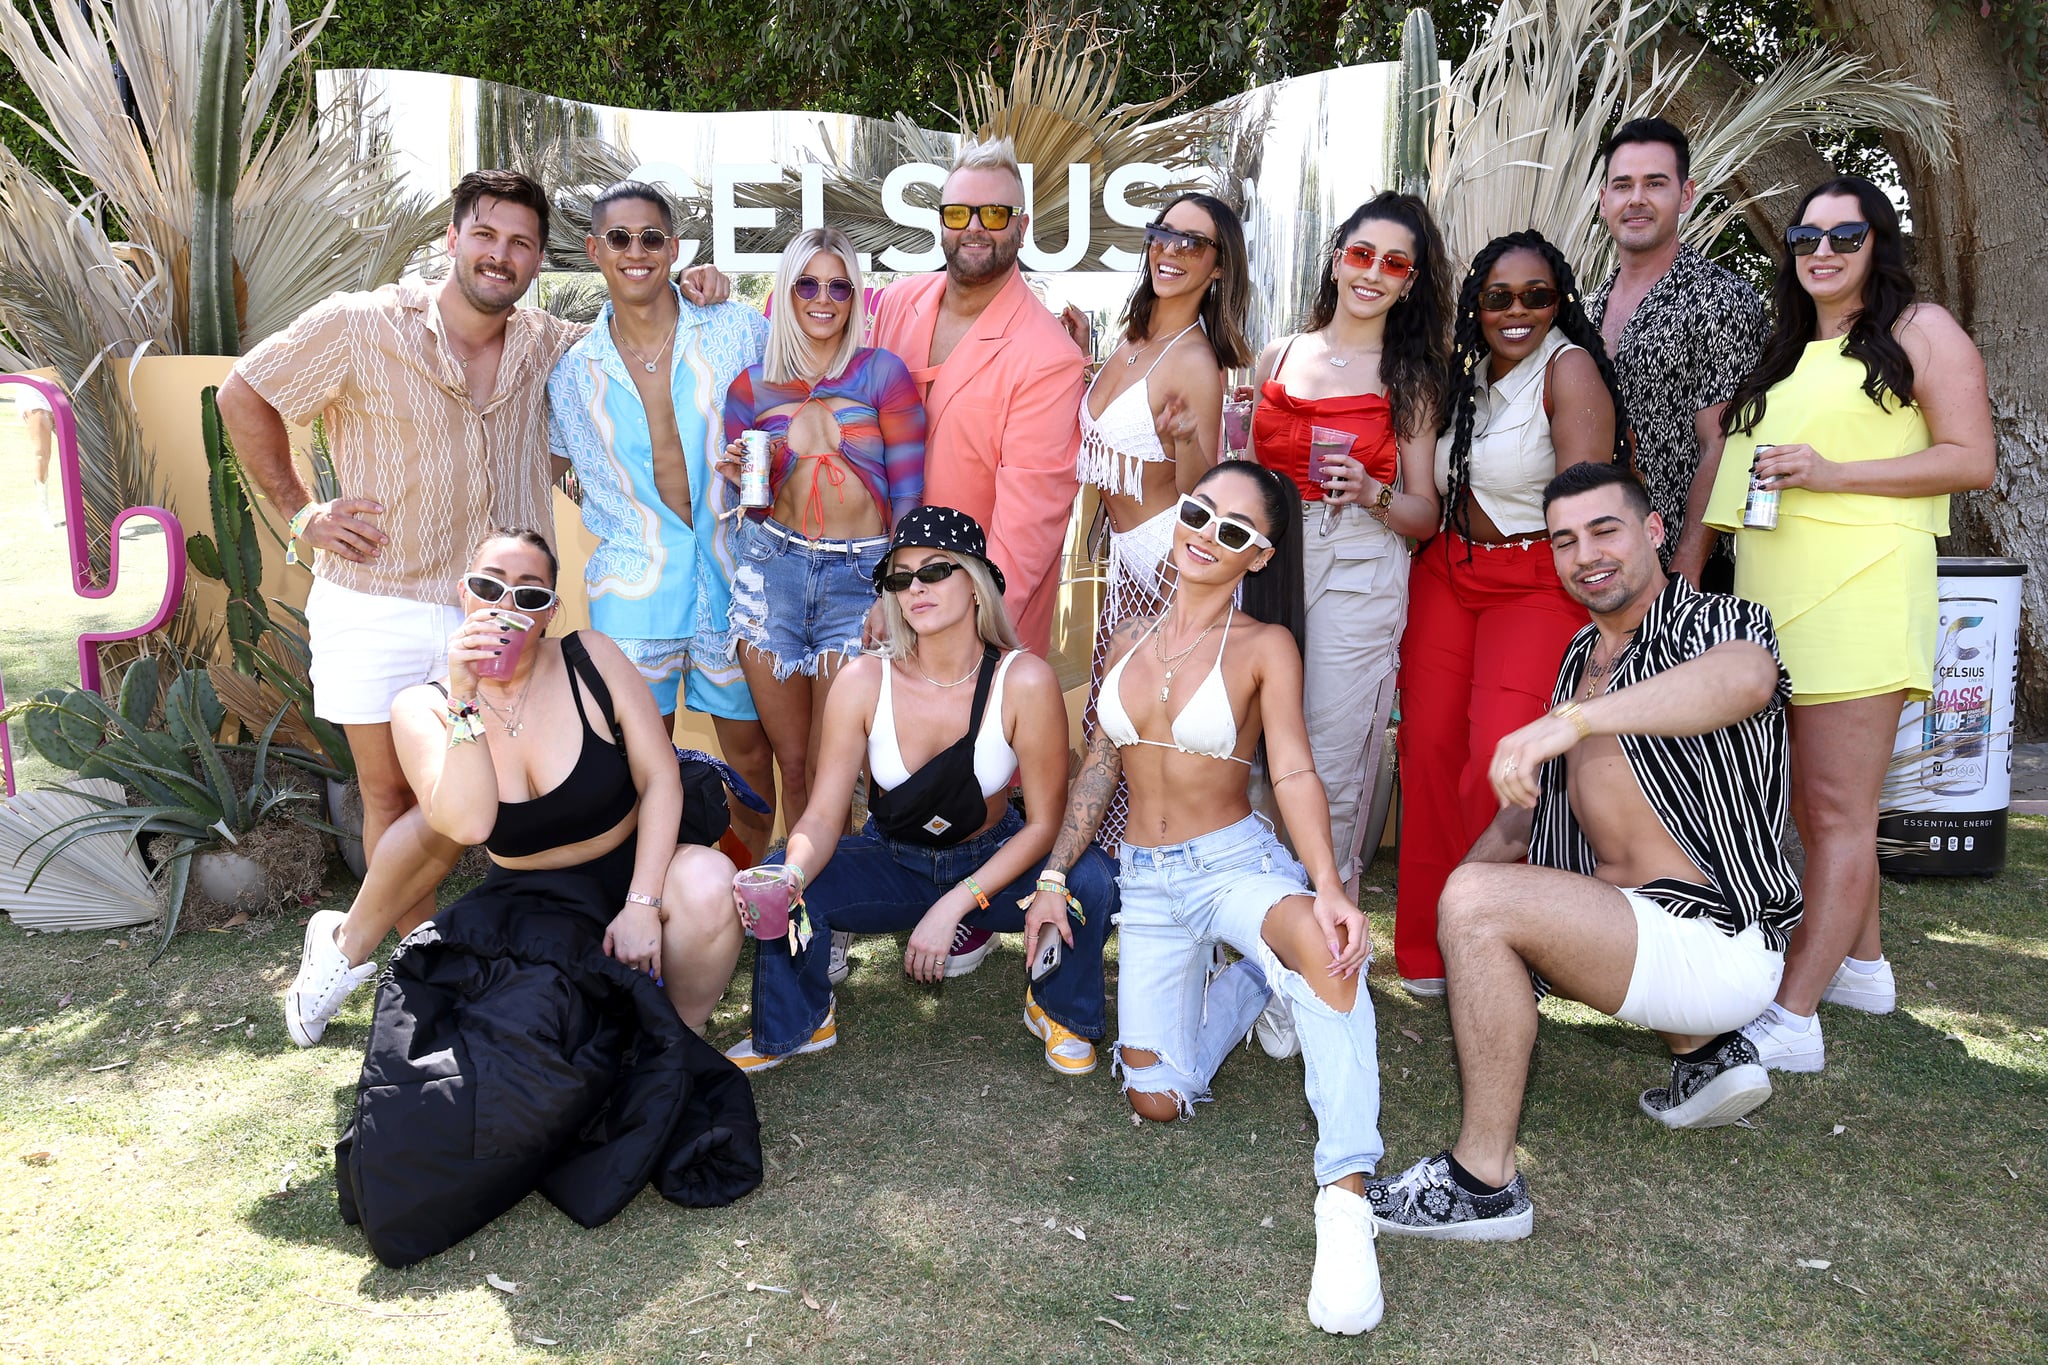 COACHELLA, CALIFORNIA - APRIL 14: (L-R) Brock Davies, guests, Ariana Madix, Dayna Kathan, Bradley Kearns, Scheana Marie, Elaine Ratner, guests, Jojo Guadagno, William Ratner and guest attend the CELSIUS Oasis Vibe House on April 14, 2023 in Coachella, California. (Photo by Tommaso Boddi/Getty Images for CELSIUS)